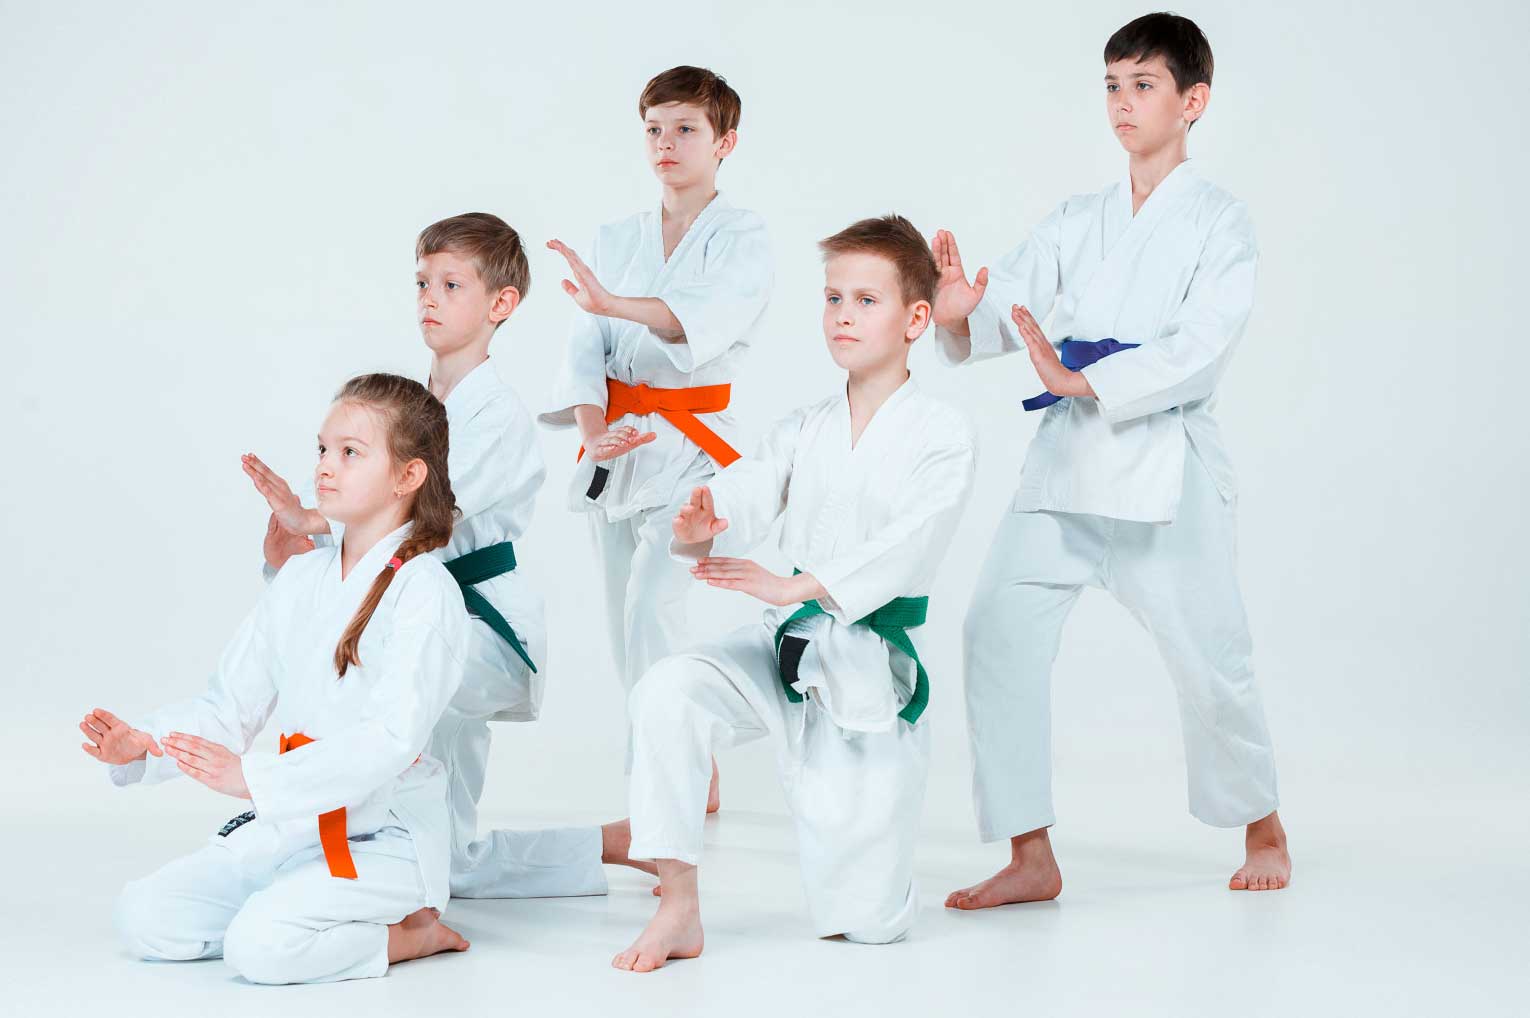 group-boys-girl-fighting-aikido-training-martial-arts-school-healthy-lifestyle-sports-concept-2